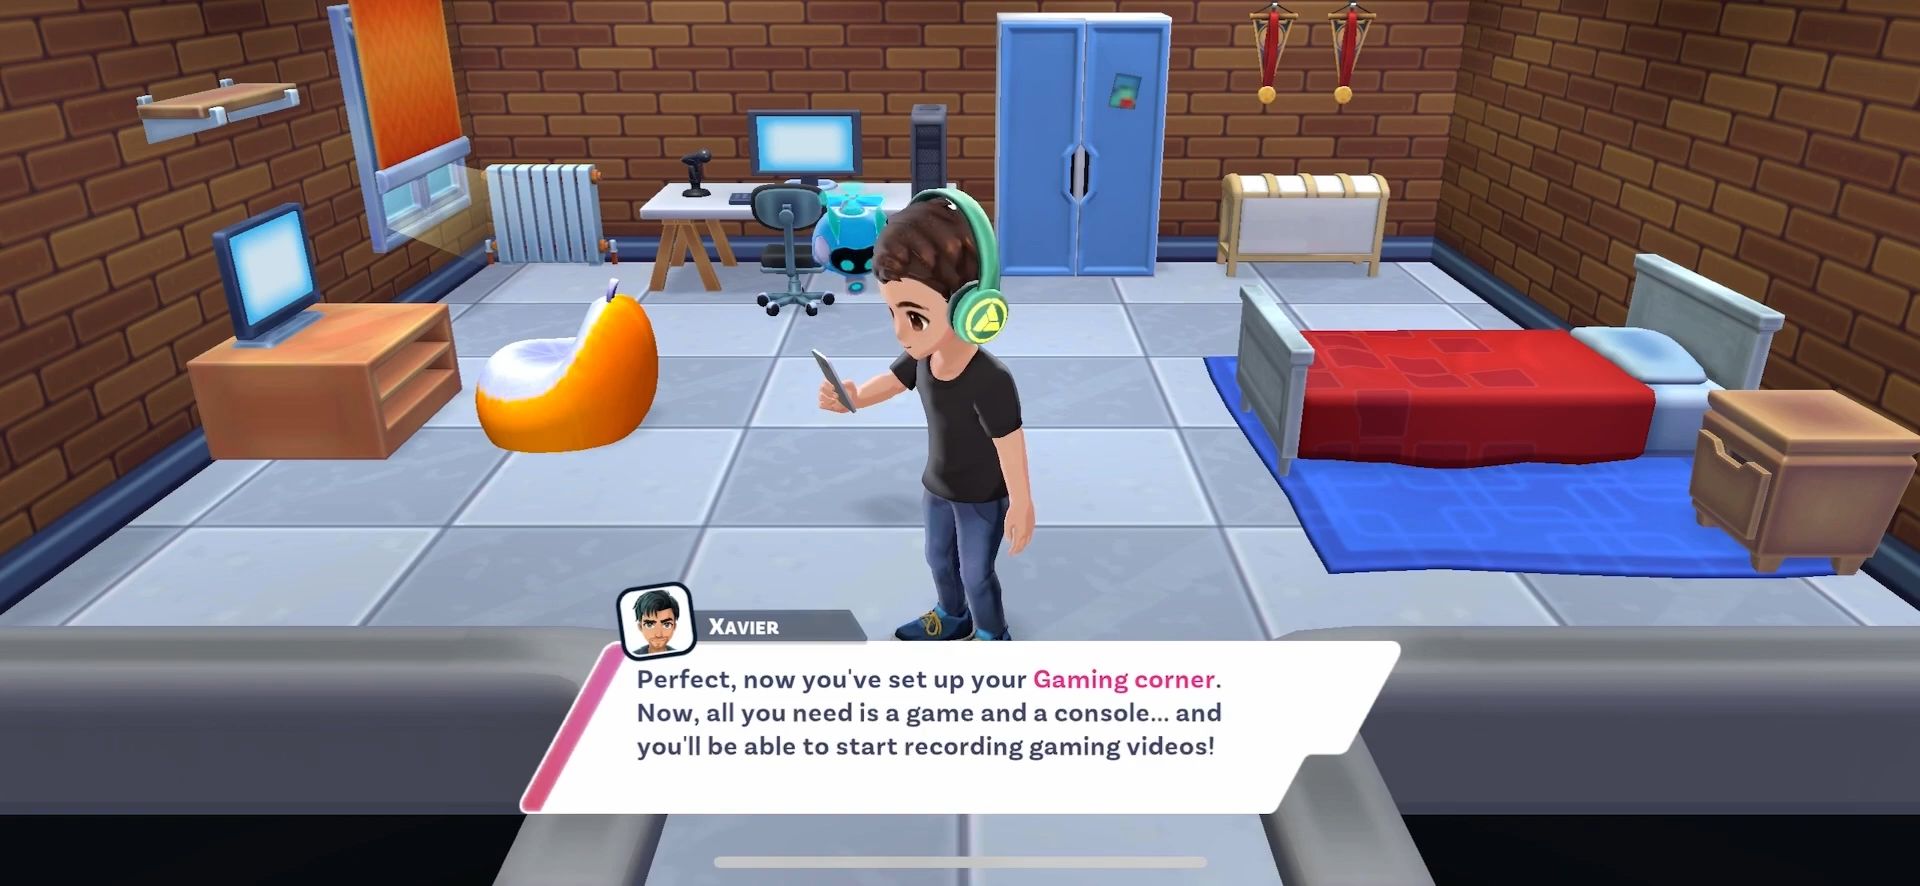 rs Life: Gaming Channel - Go Viral! v1.6.4 MOD APK -   - Android & iOS MODs, Mobile Games & Apps